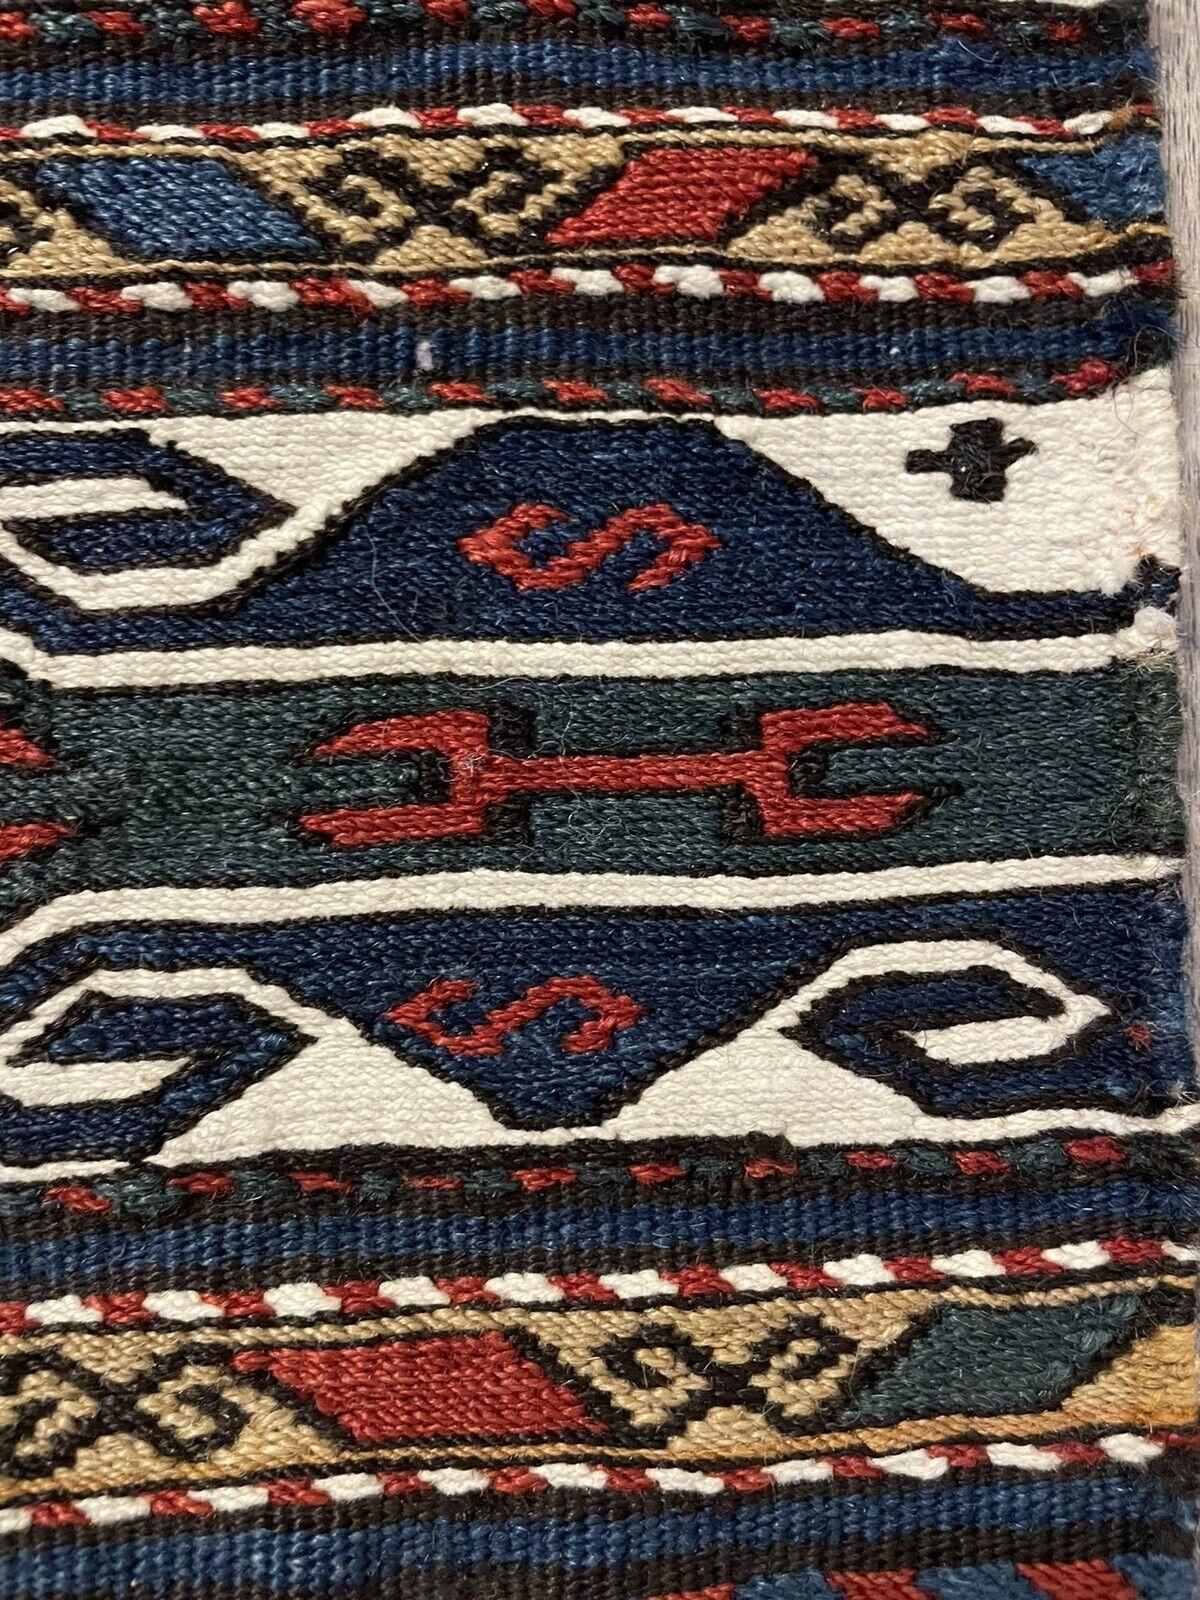 Wool Handmade Antique Persian Style Sumak Collectible Kilim 1.3' x 1.8, 1900s - 1N04 For Sale